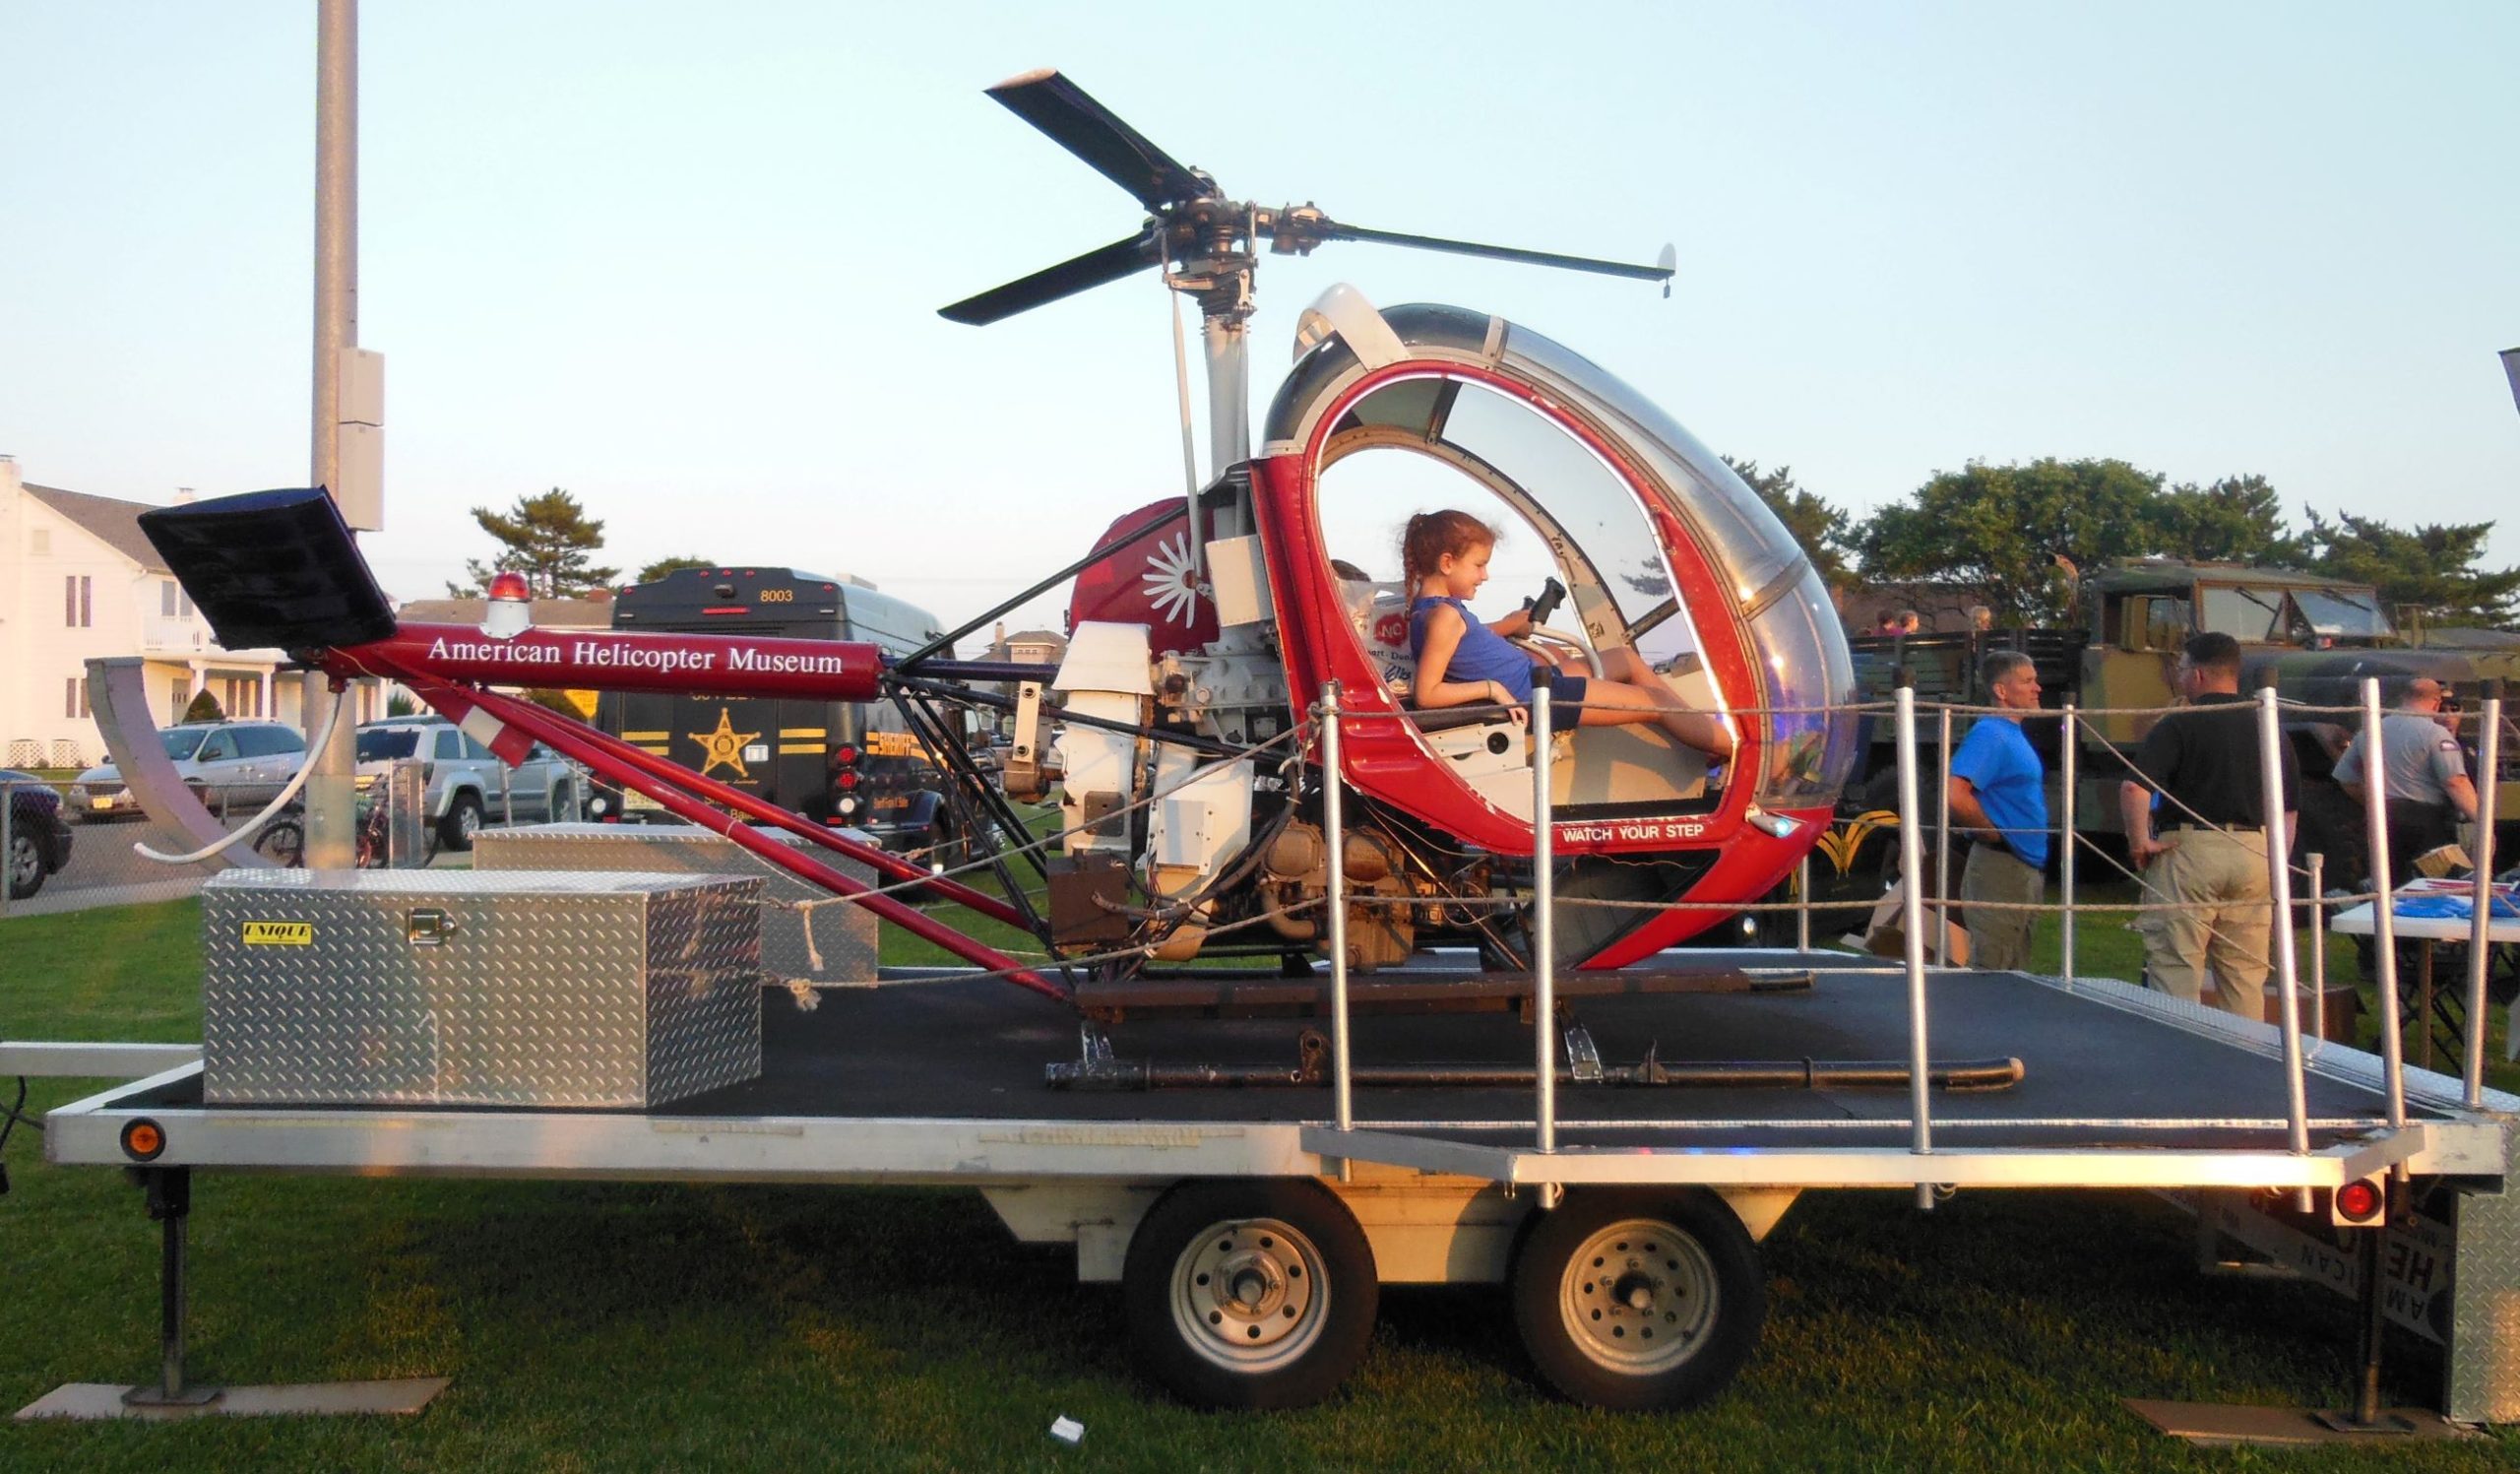 Mobile Helicopter Exhibit